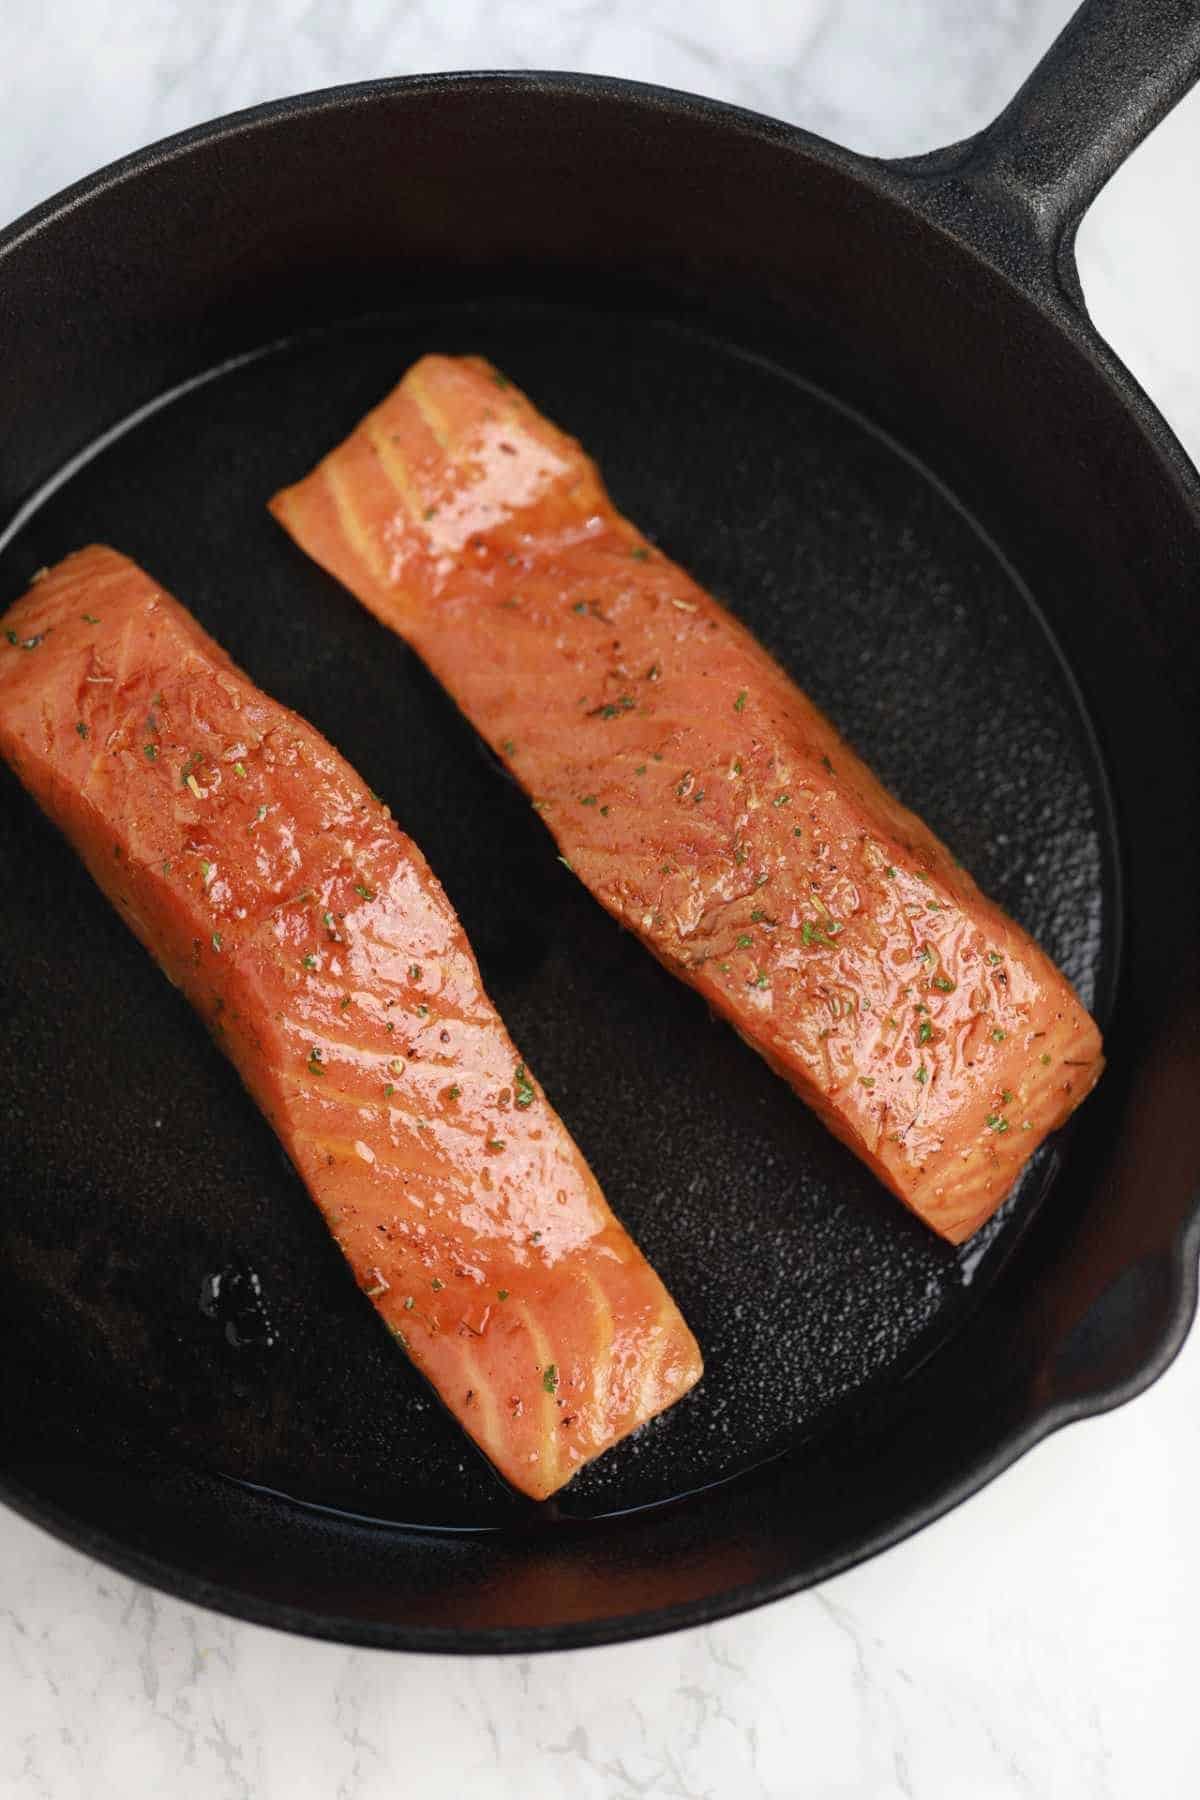 2 salmon fillets in a pan.